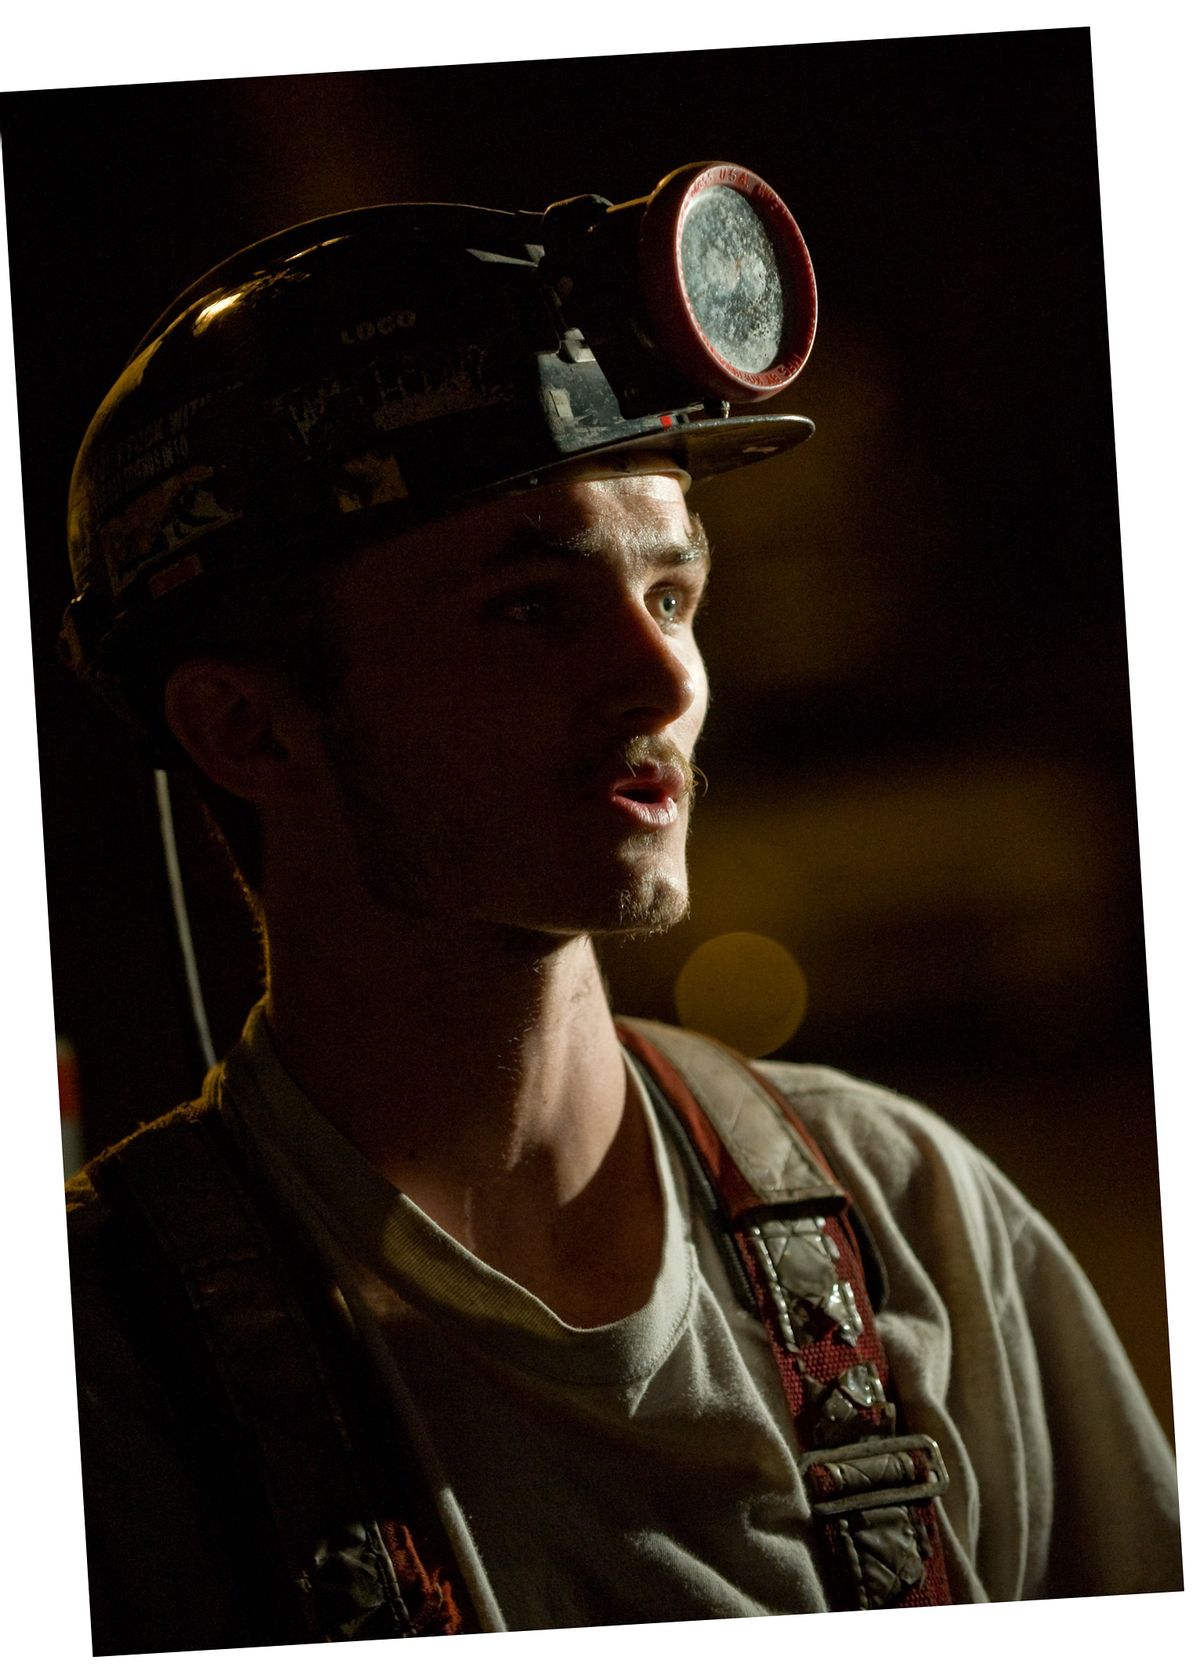 A coal miner who would only identify himself as Chris speaks about the miners who died in a Monday evening explosion at Massey Energy Co.'s sprawling Upper Big Branch mine in Montcoal, W.Va. Wednesday, April 7, 2010. (AP Photo/Bob Bird) (Bob Bird)